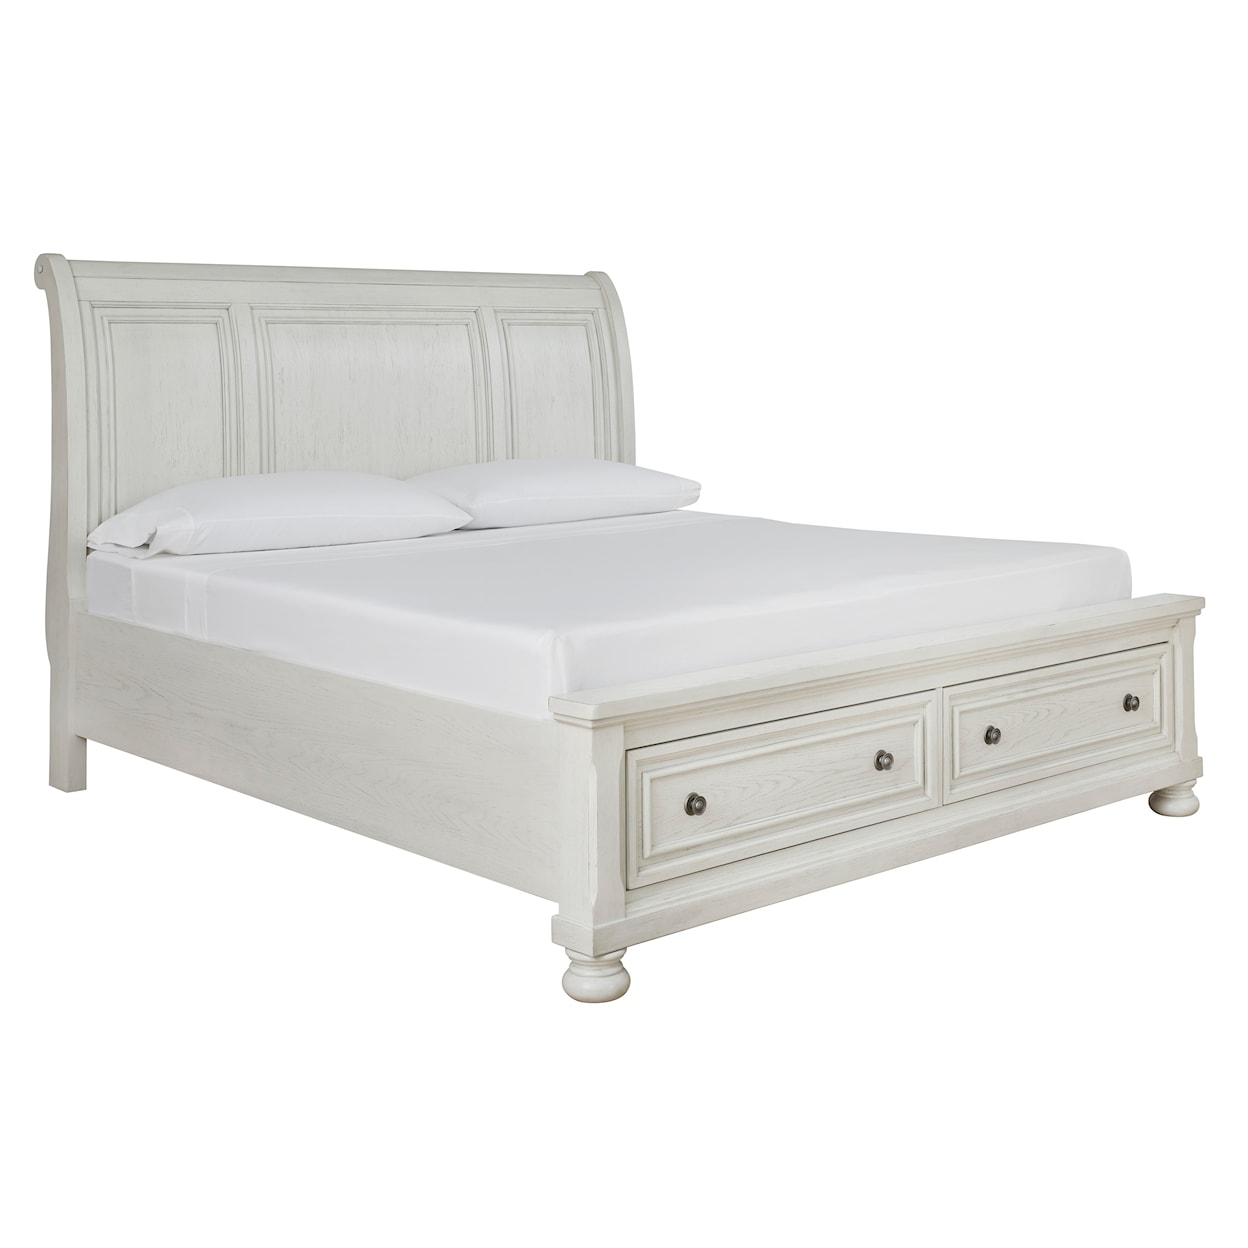 Ashley Signature Design Robbinsdale King Sleigh Bed with Storage